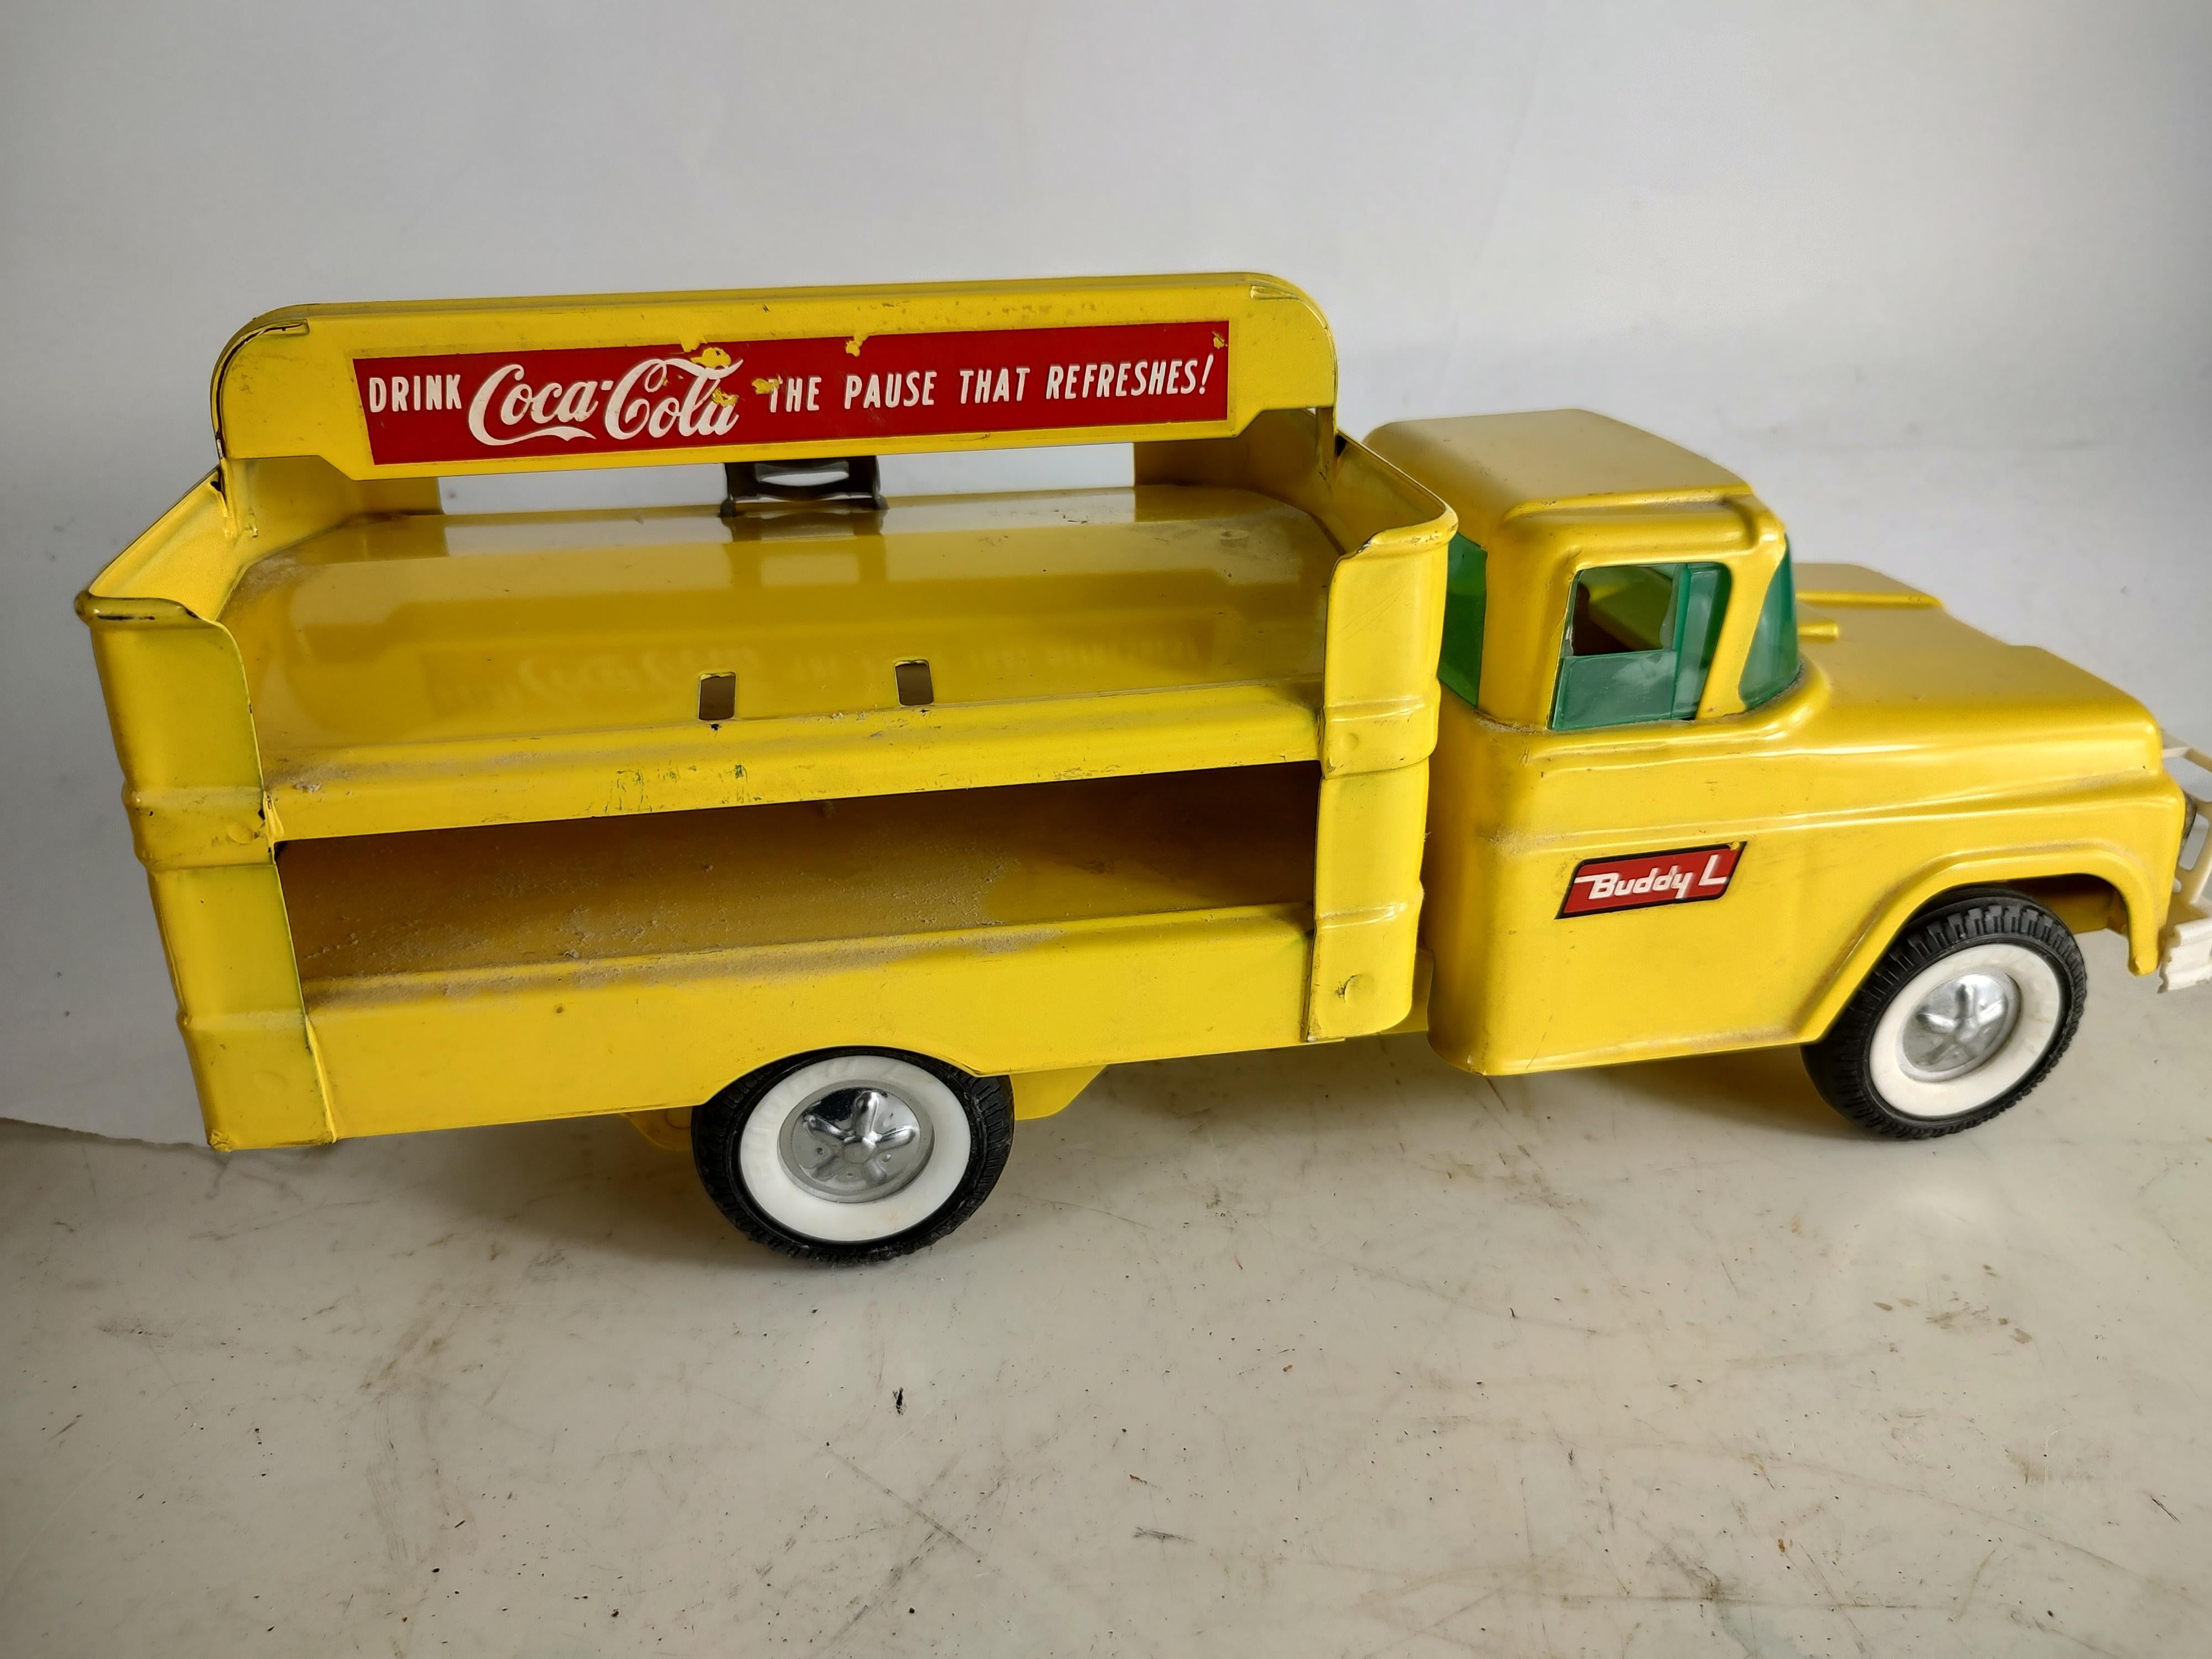 Hand-Crafted Mid Century Toy Coca Cola Delivery Truck by Buddy L